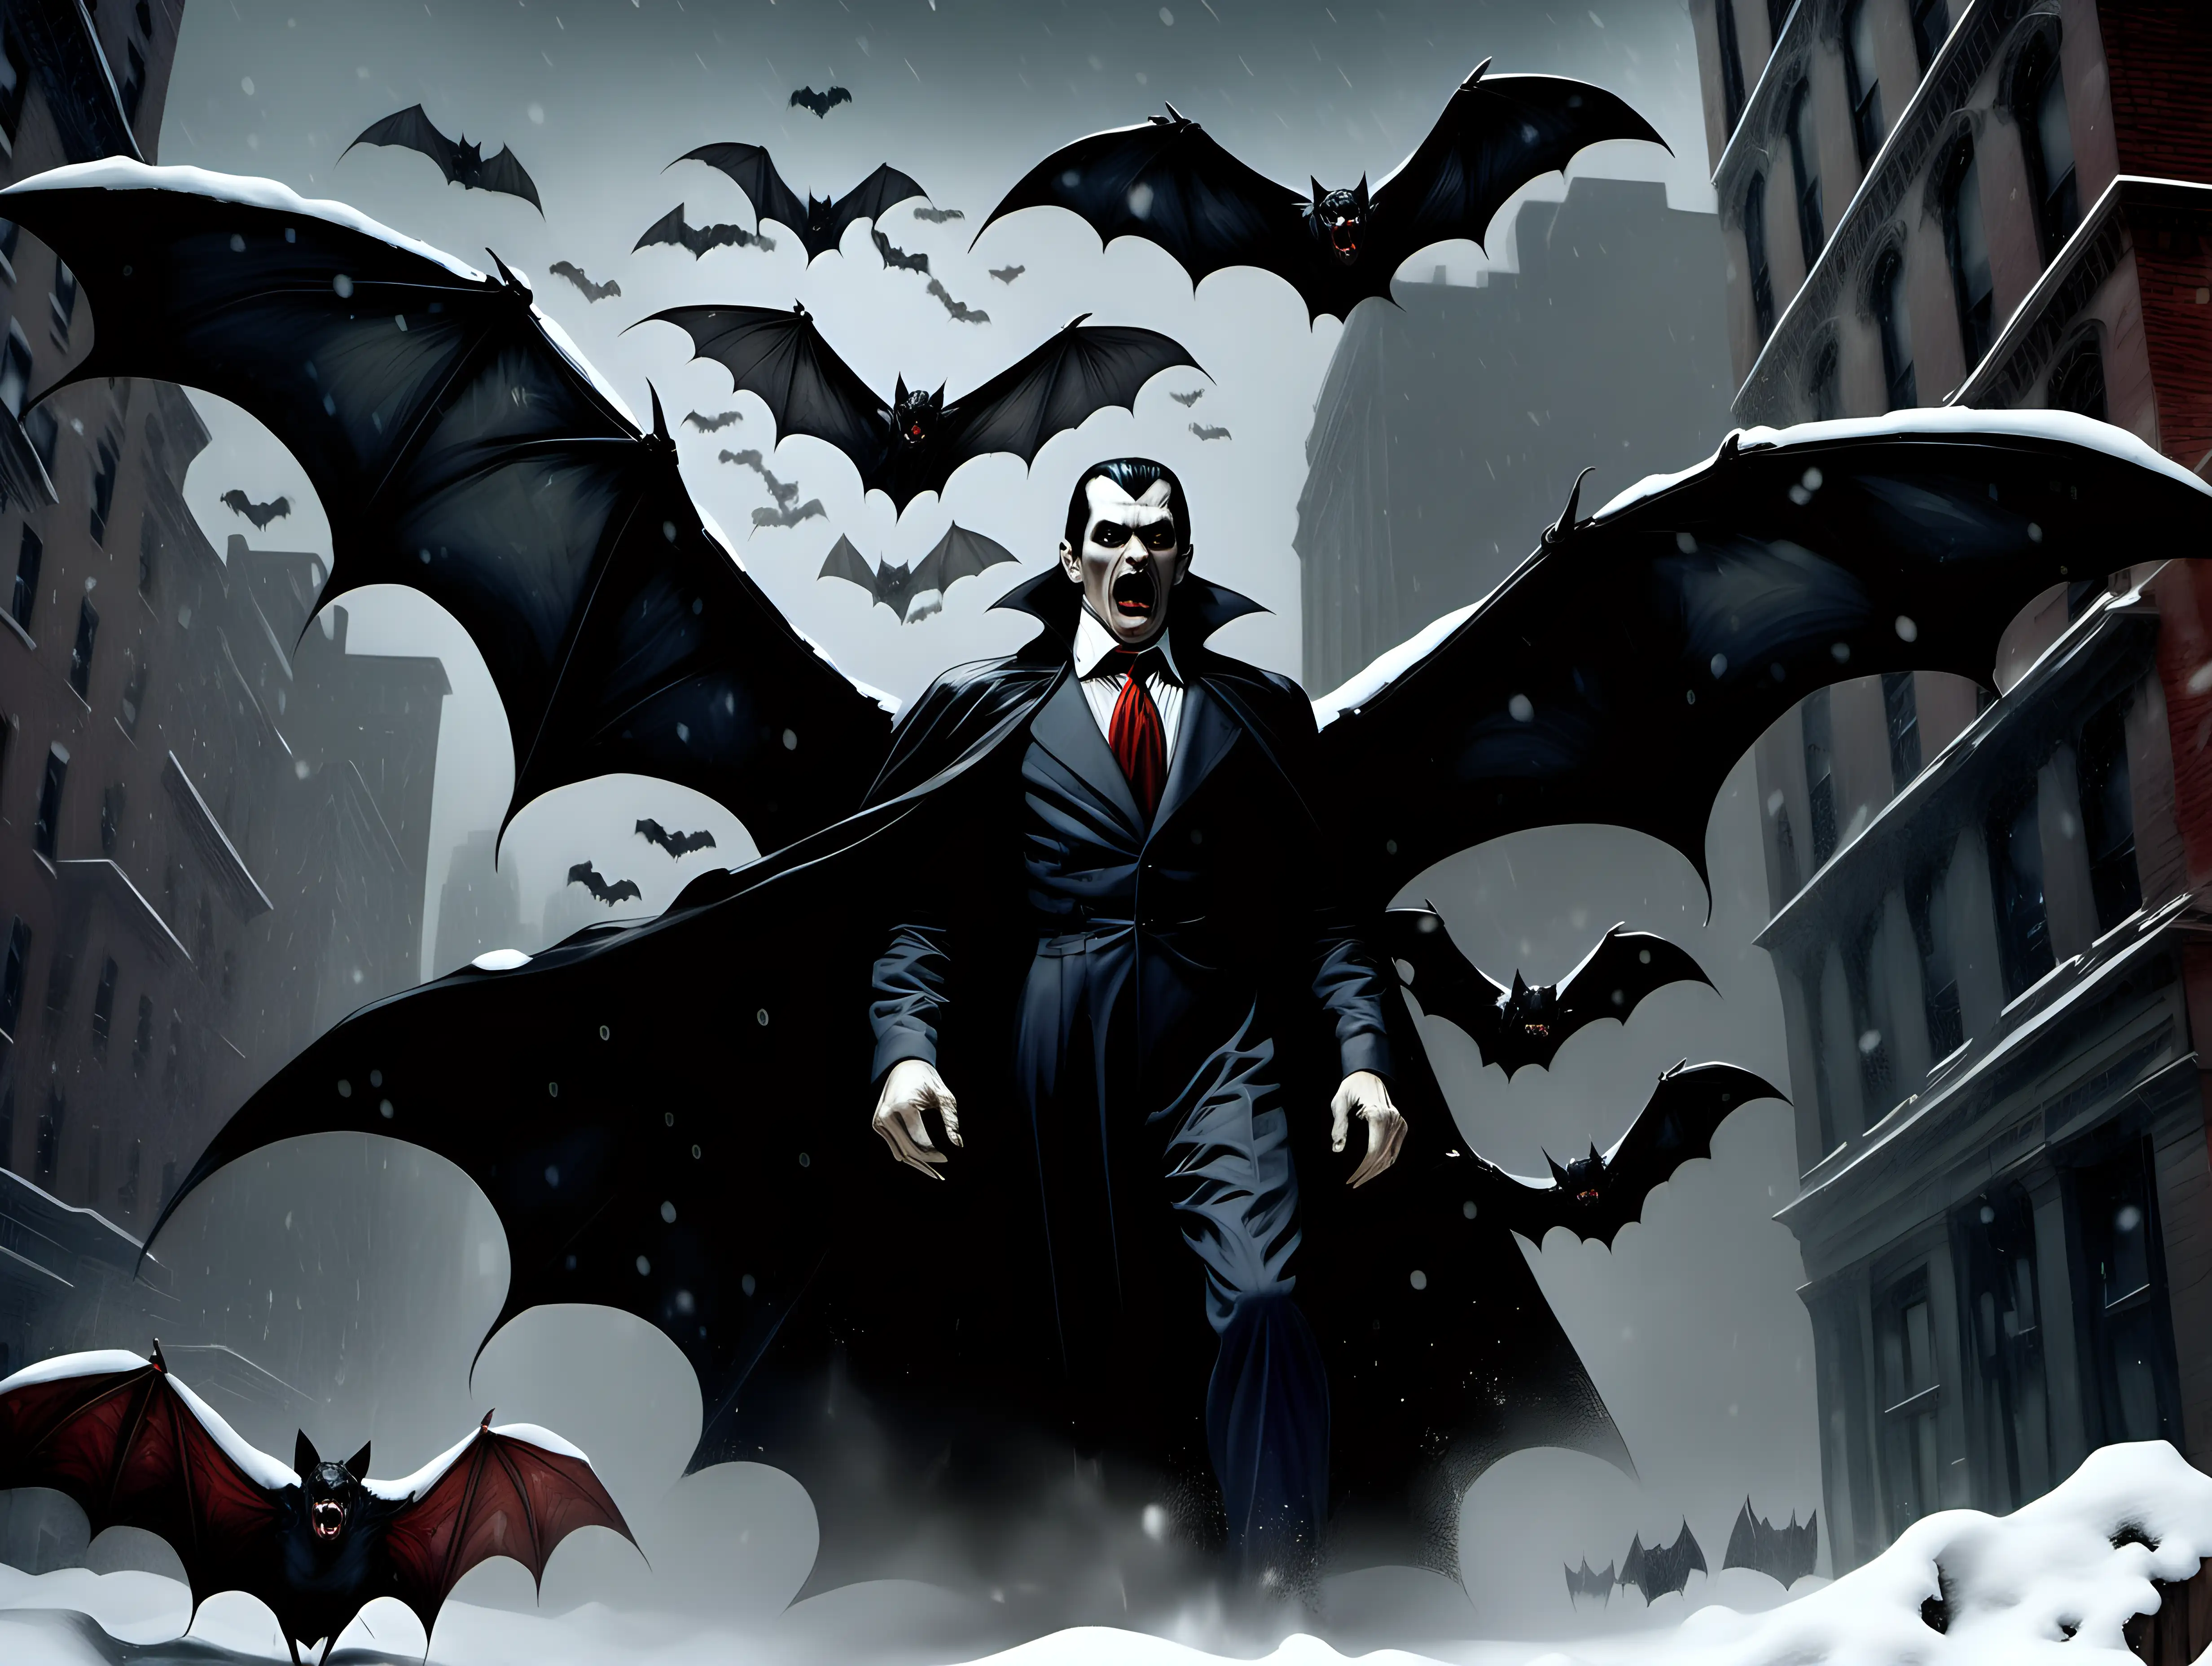 Dracula and Vampire bats swarming NYC in a snow blizzard in style of realism by frank frazetta and annie leibovitz, emotive and moody and muted, dark background